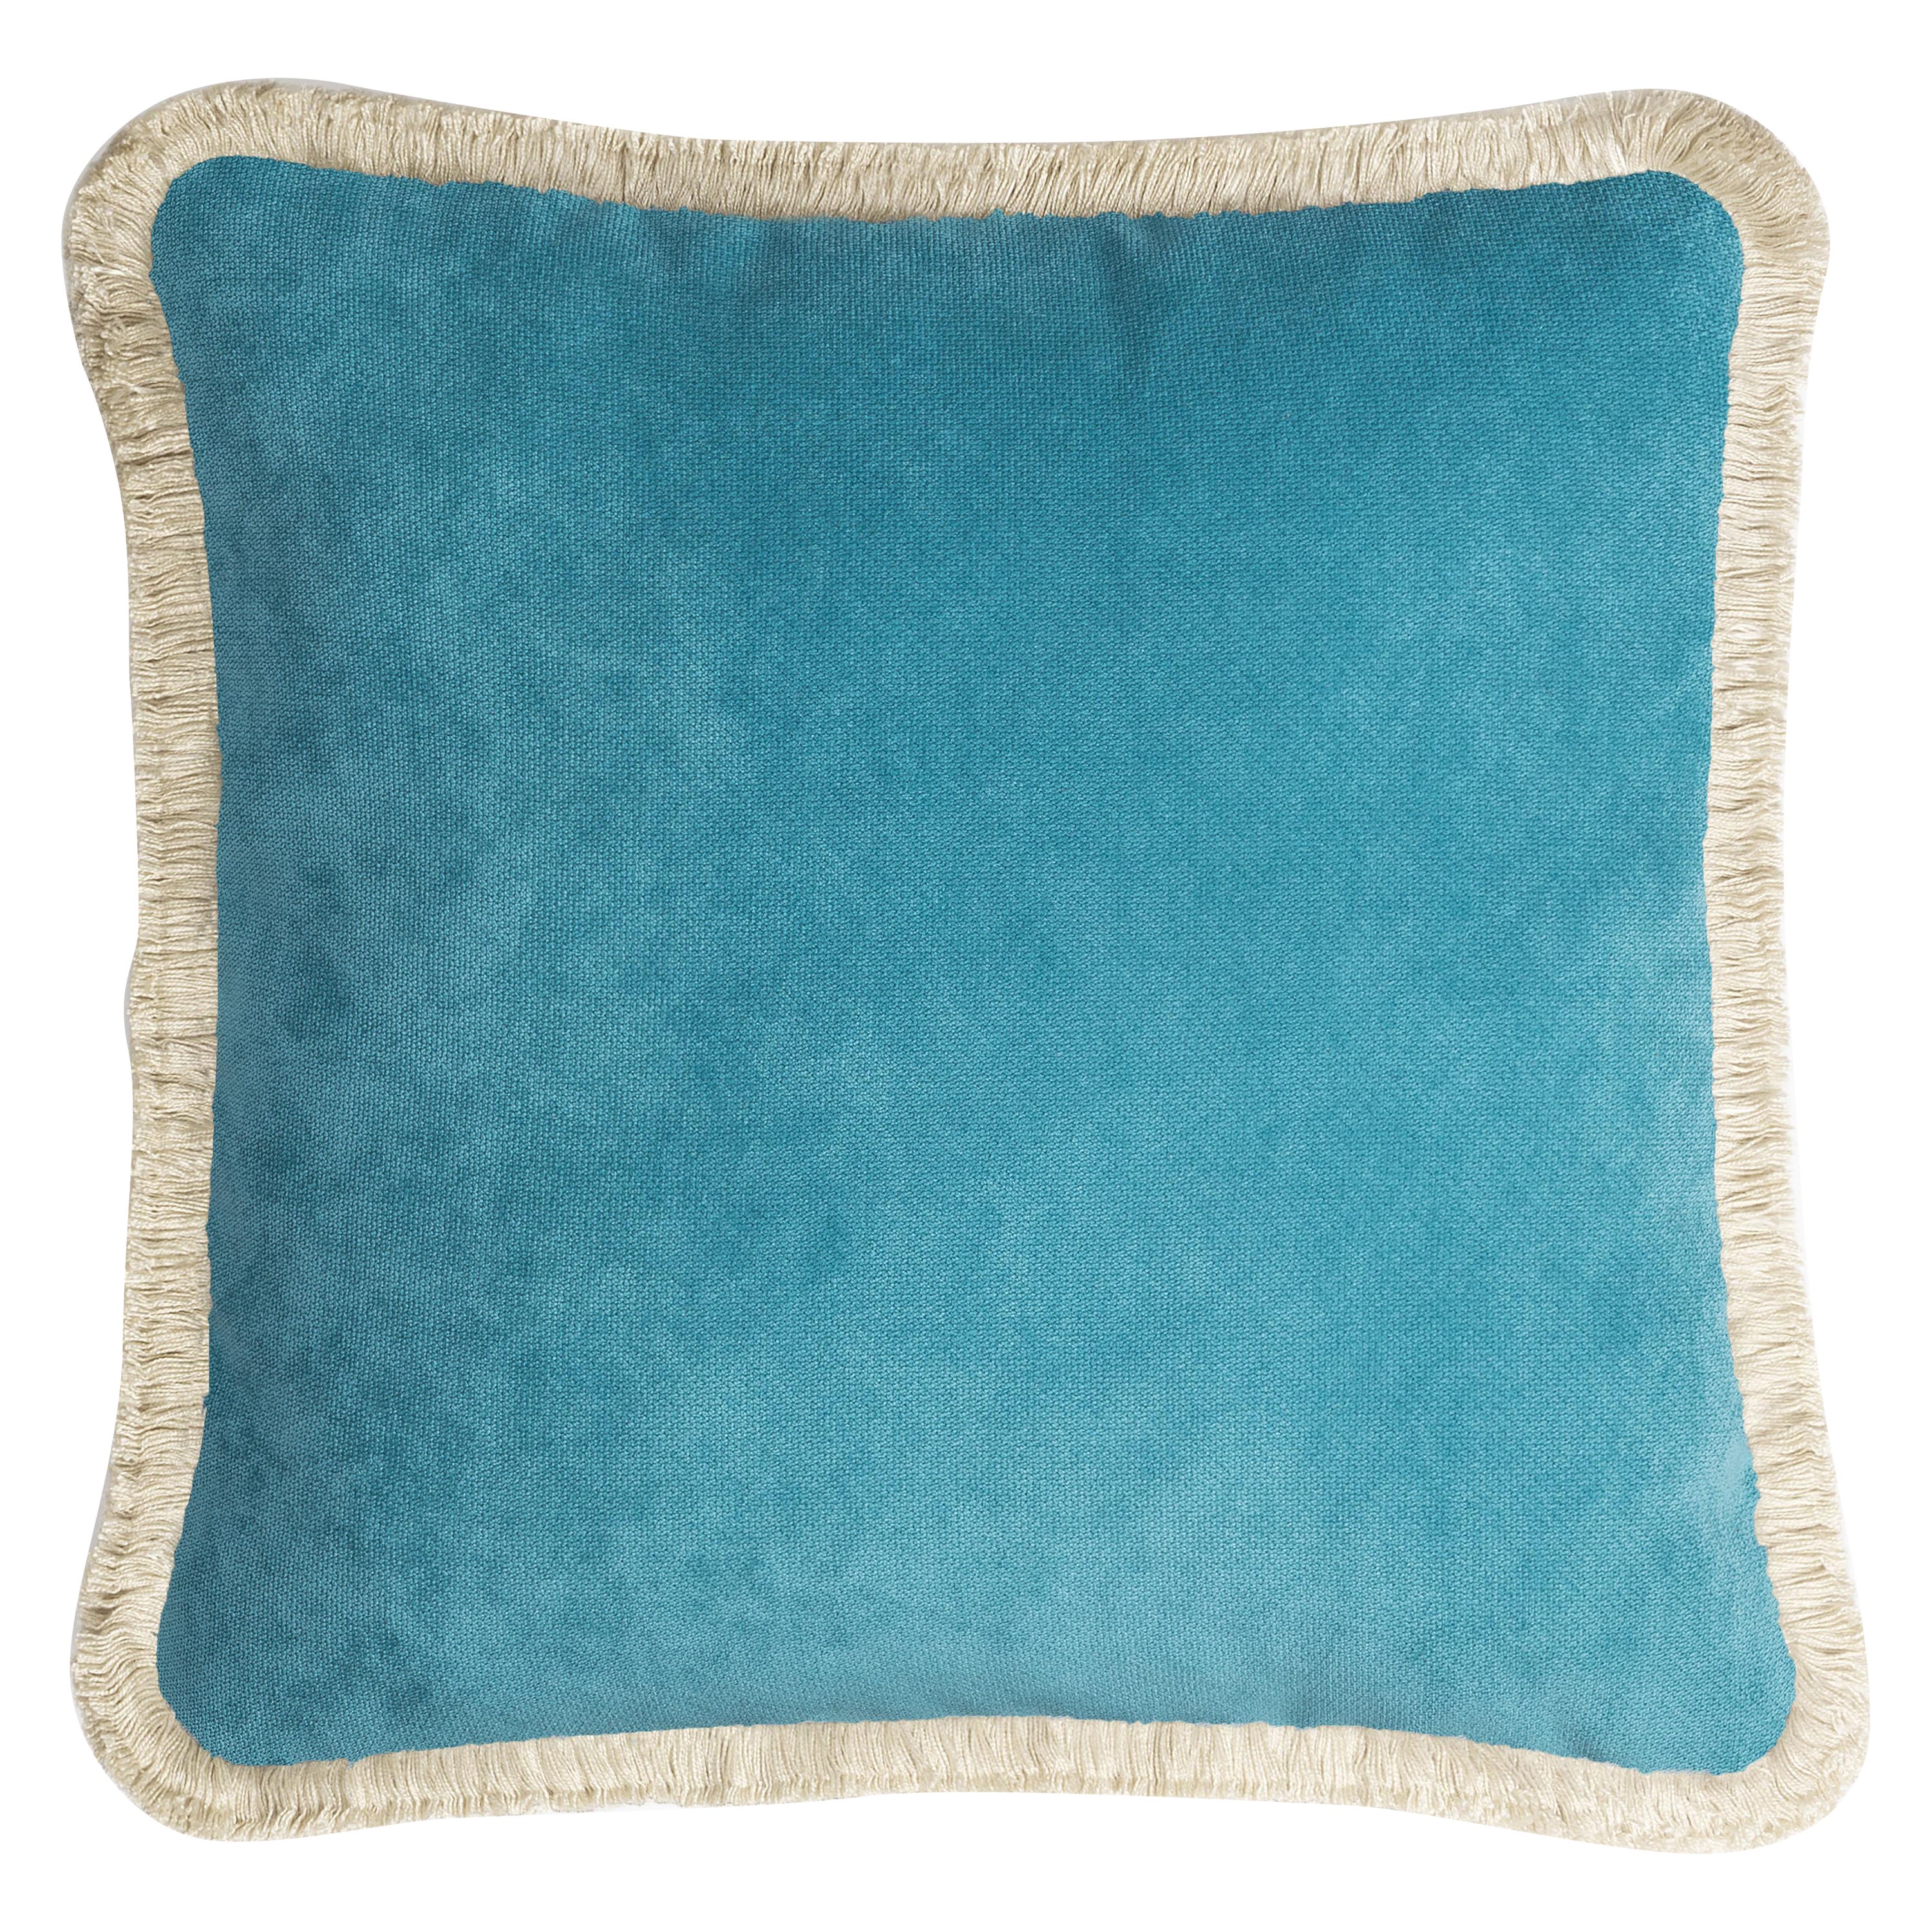 HAPPY PILLOW 40 Velvet Turquoise with Cream Fringes For Sale